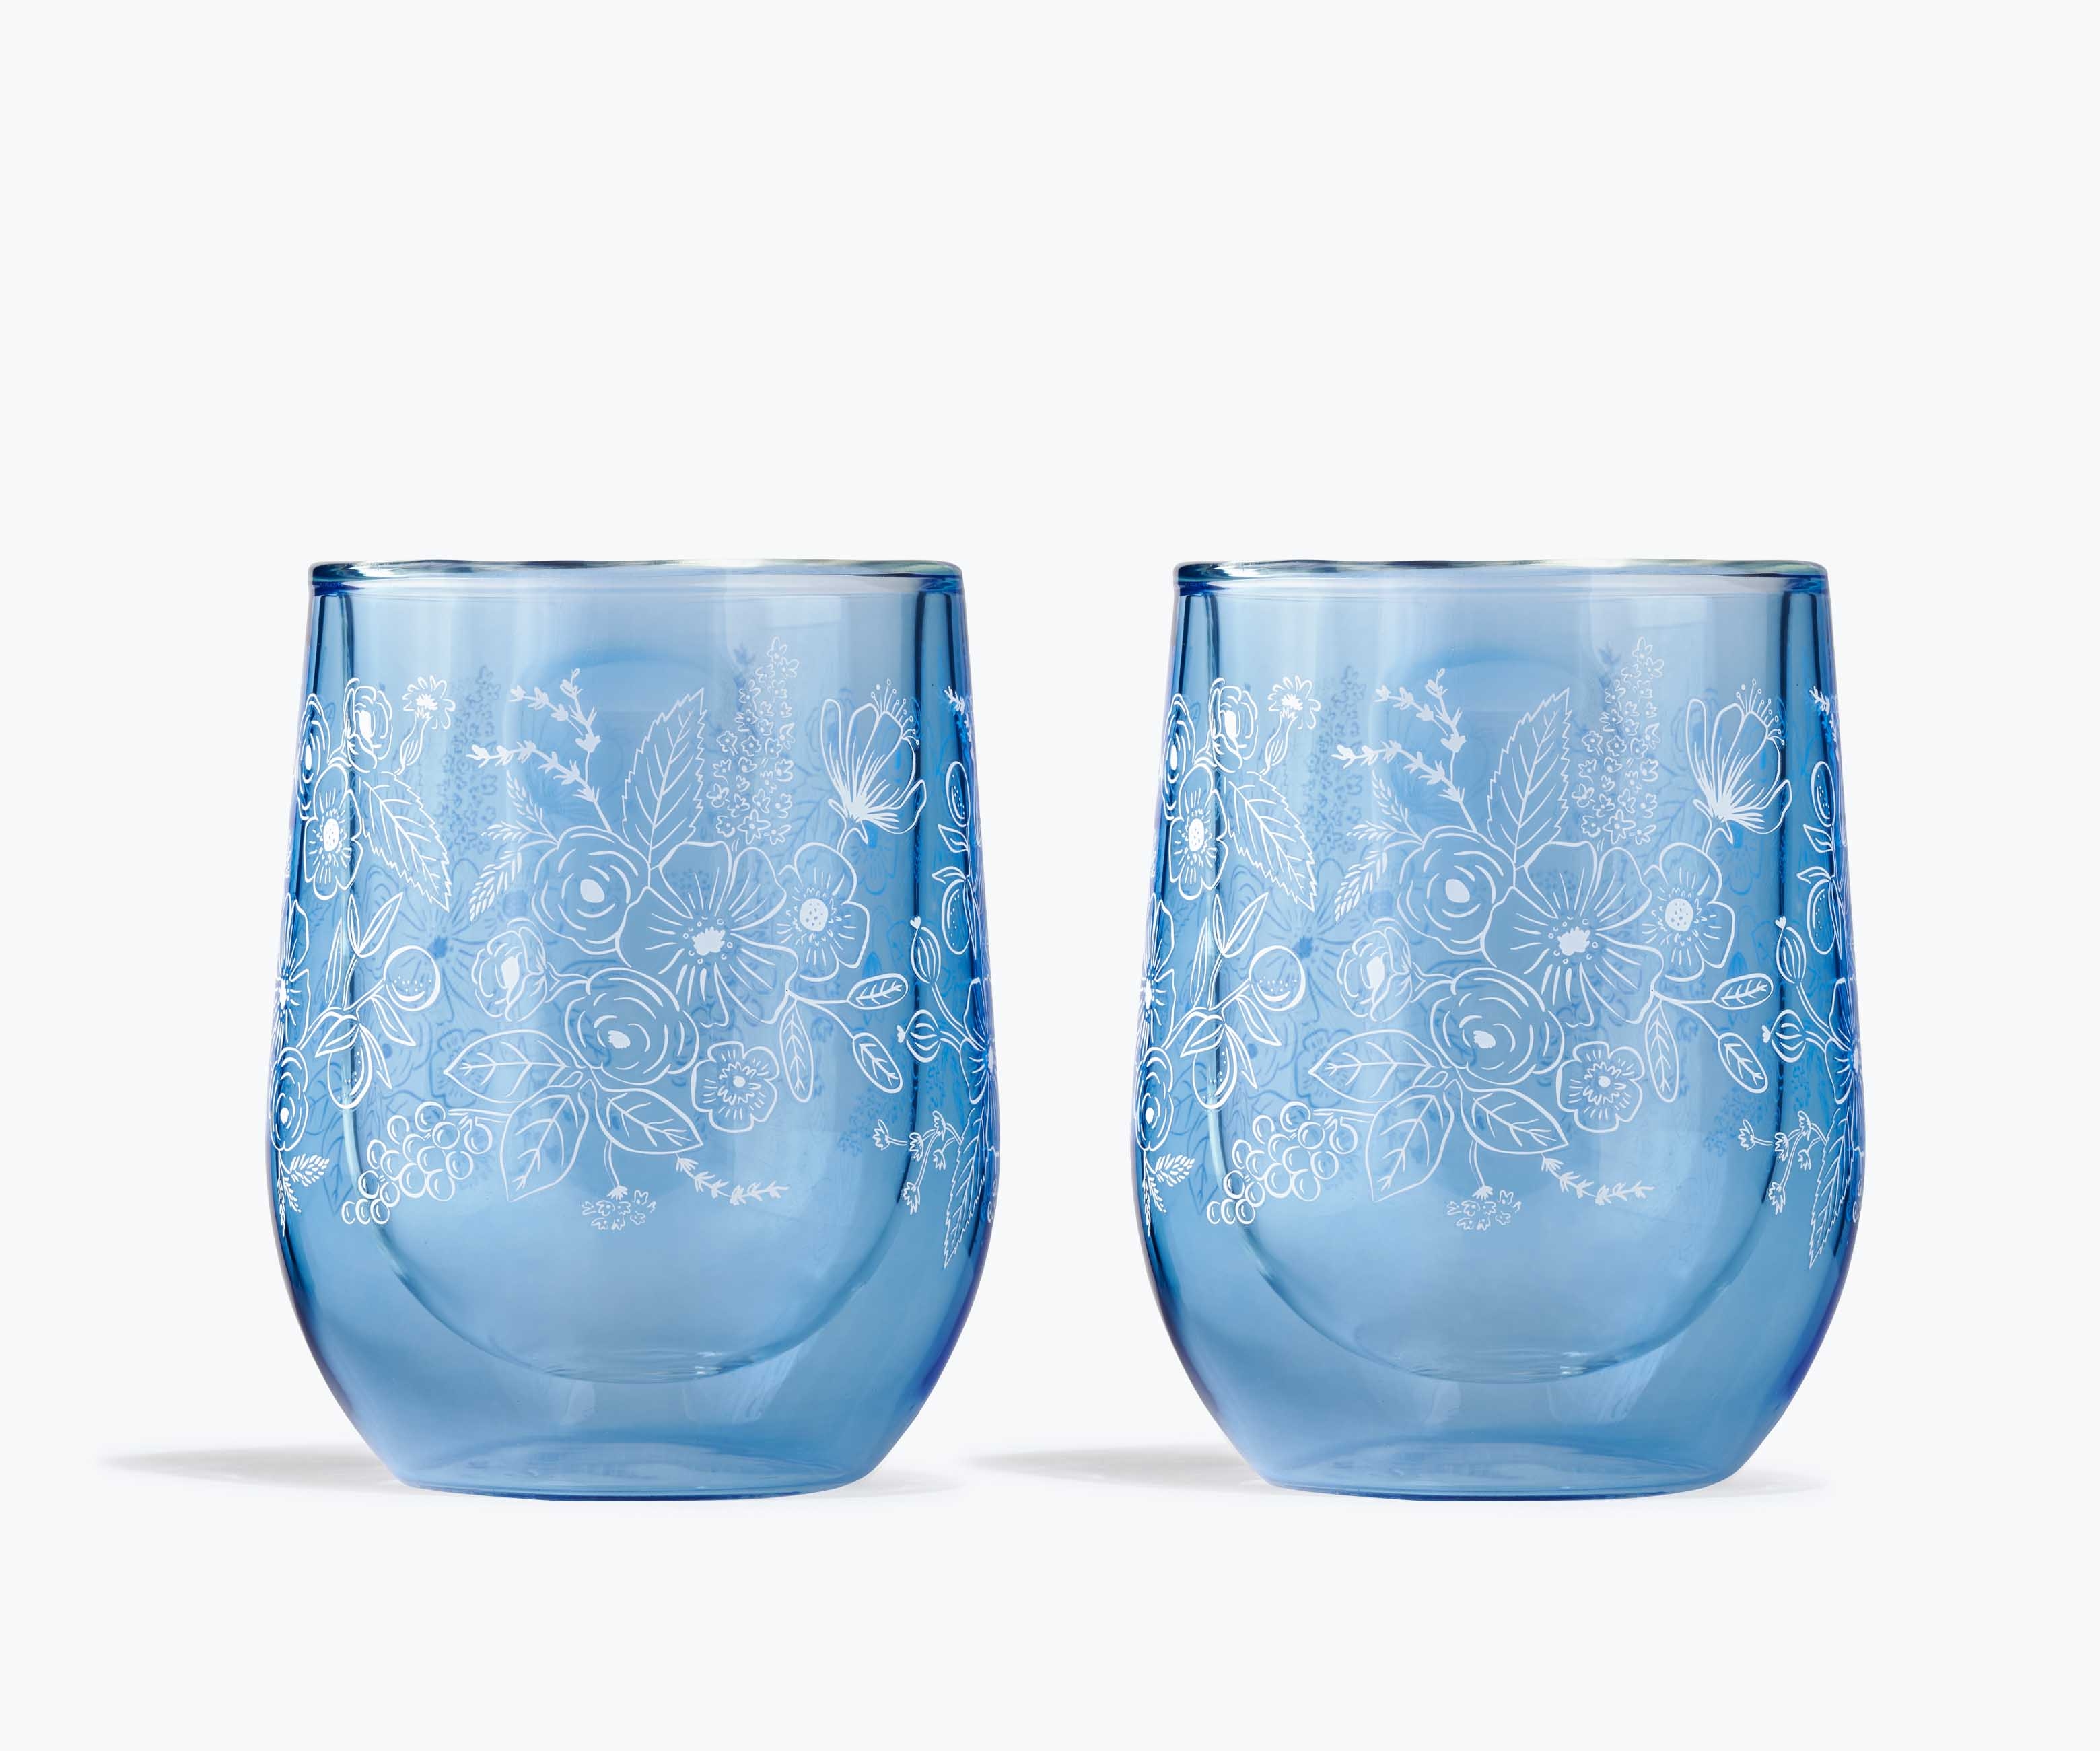 https://sirv.riflepaperco.com/rpc/catalog/product/r/p/rp7401ibwc-clearbluecolette-glassstemless-01.jpg?profile=riflepaperco&q=100&w=3120&h=2602